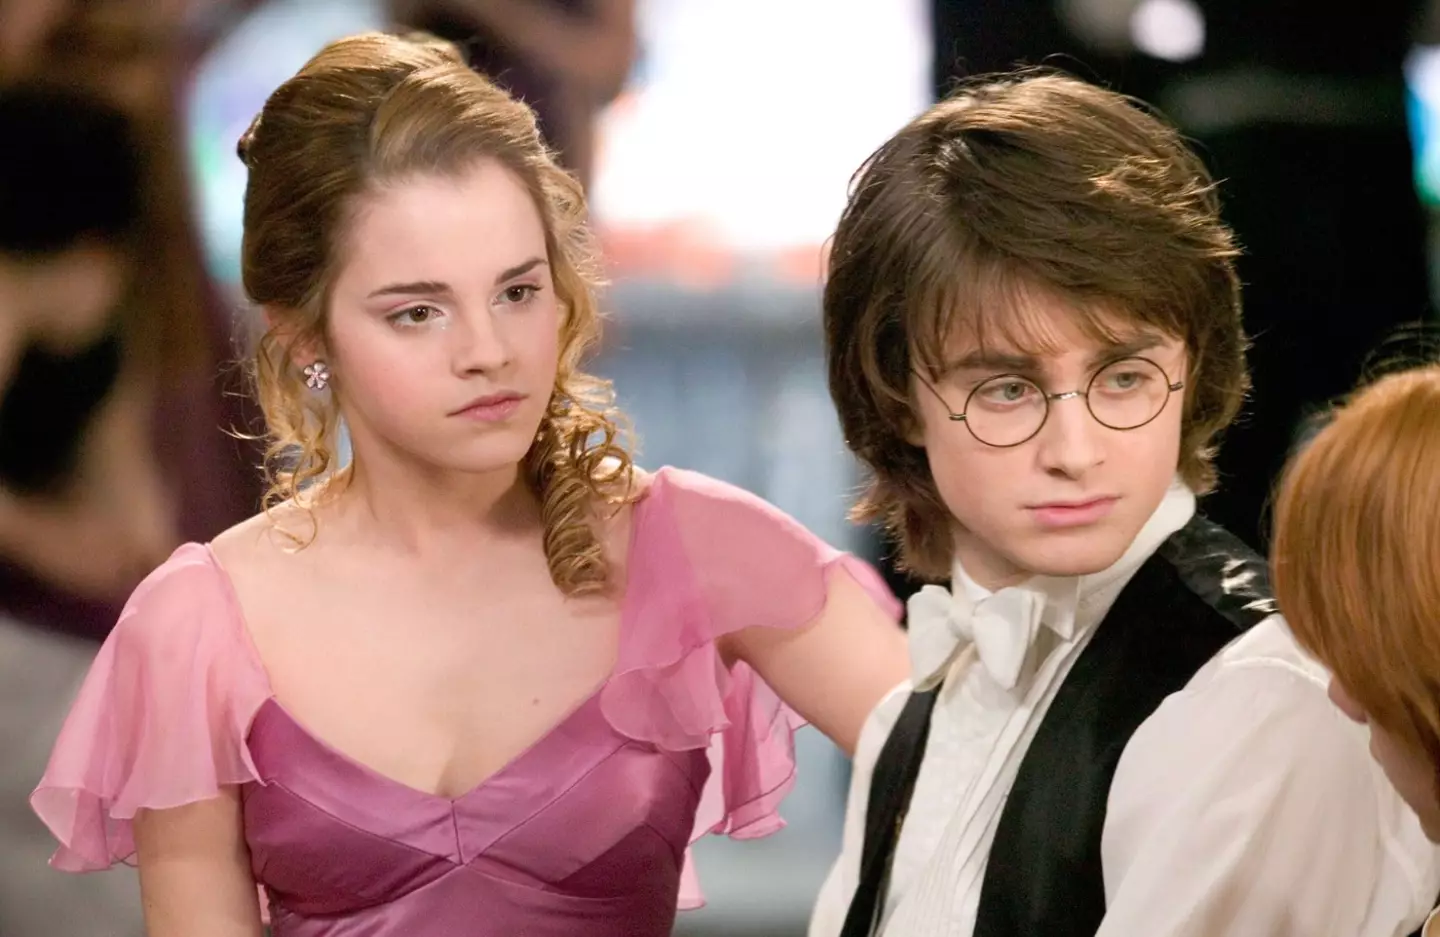 The reaction to JK Rowling's response to a tweet about Emma Watson and Daniel Radcliffe (Warner Bros. Pictures) 